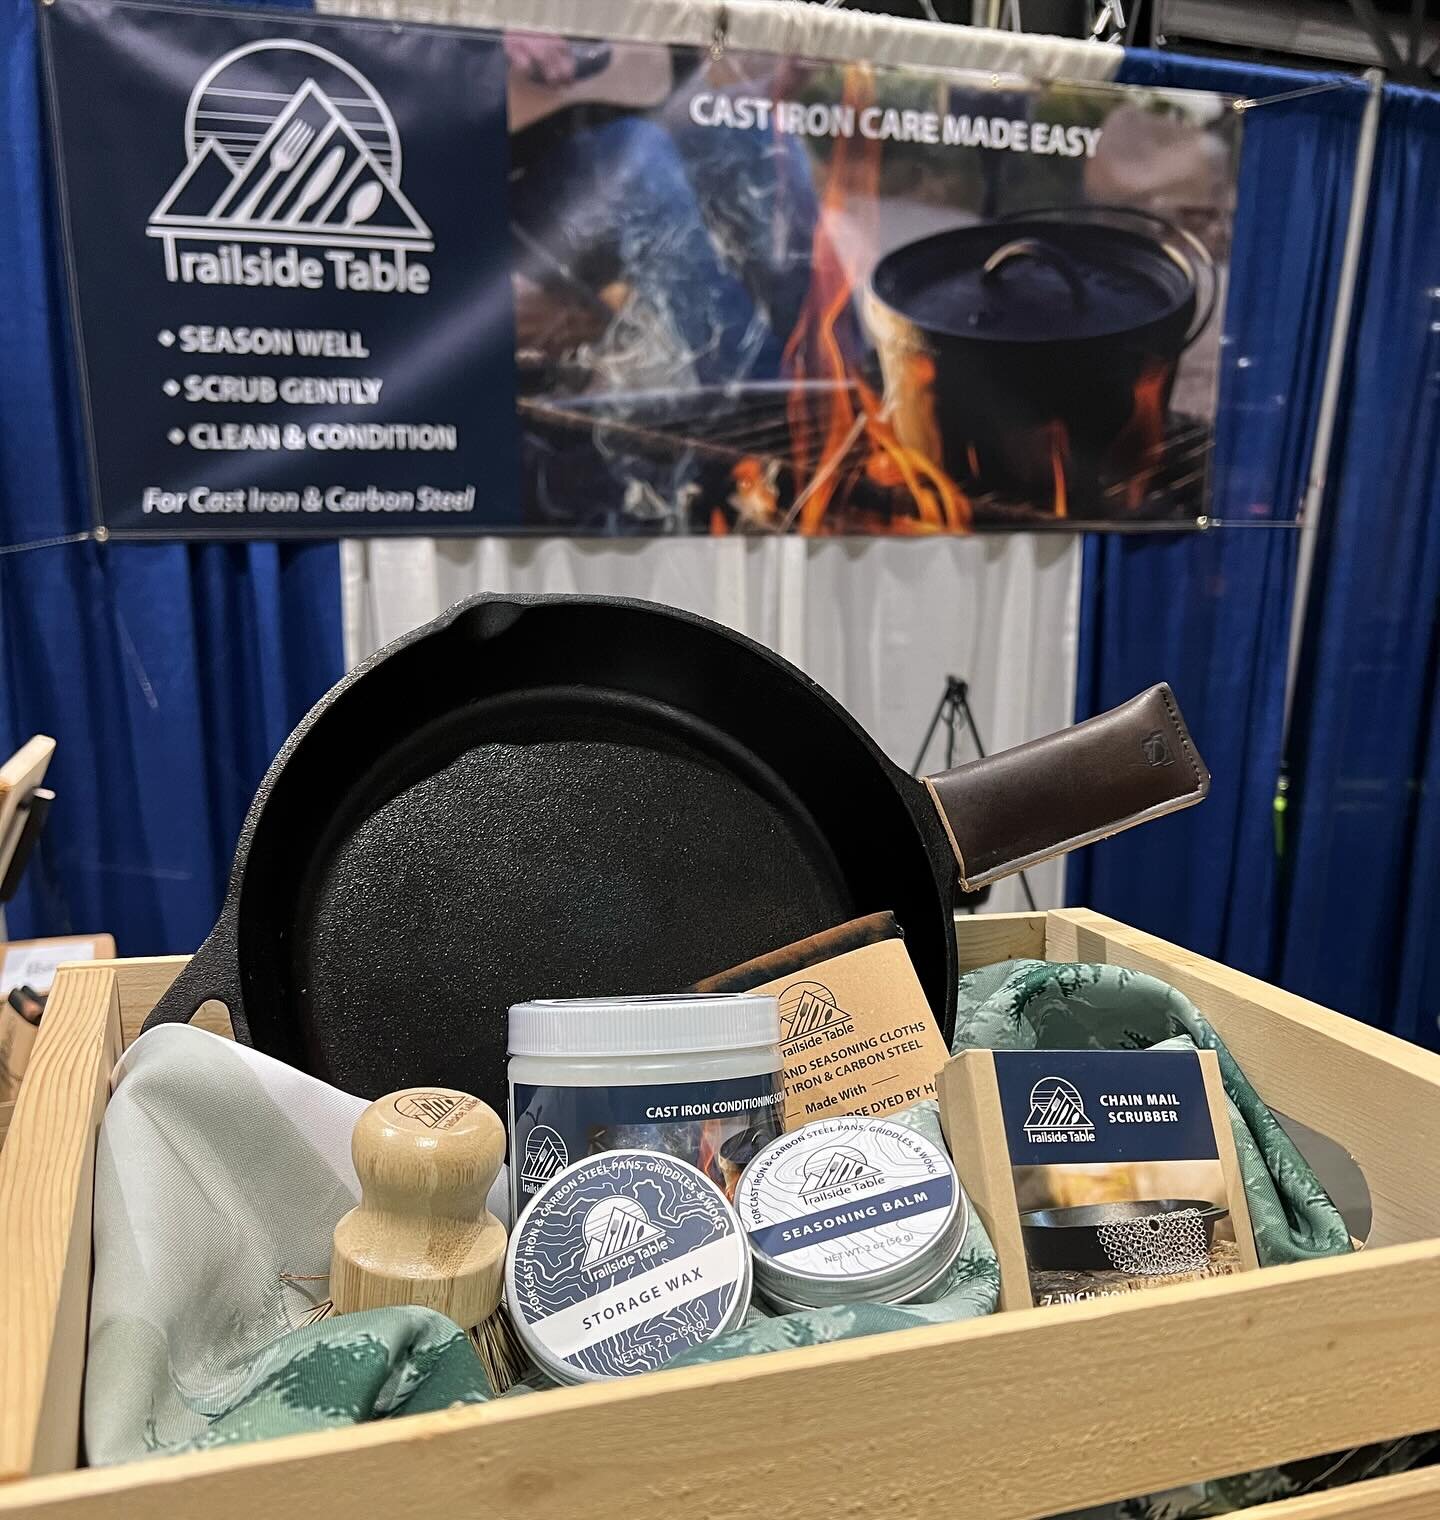 Come by the @thesportshows at the Portland Expo Center now through Sunday and enter to win a prize bundle that includes all of our cast iron maintenance products as well as a freshly seasoned skillet of your very own!

#sportsmensshow #castiron #cast